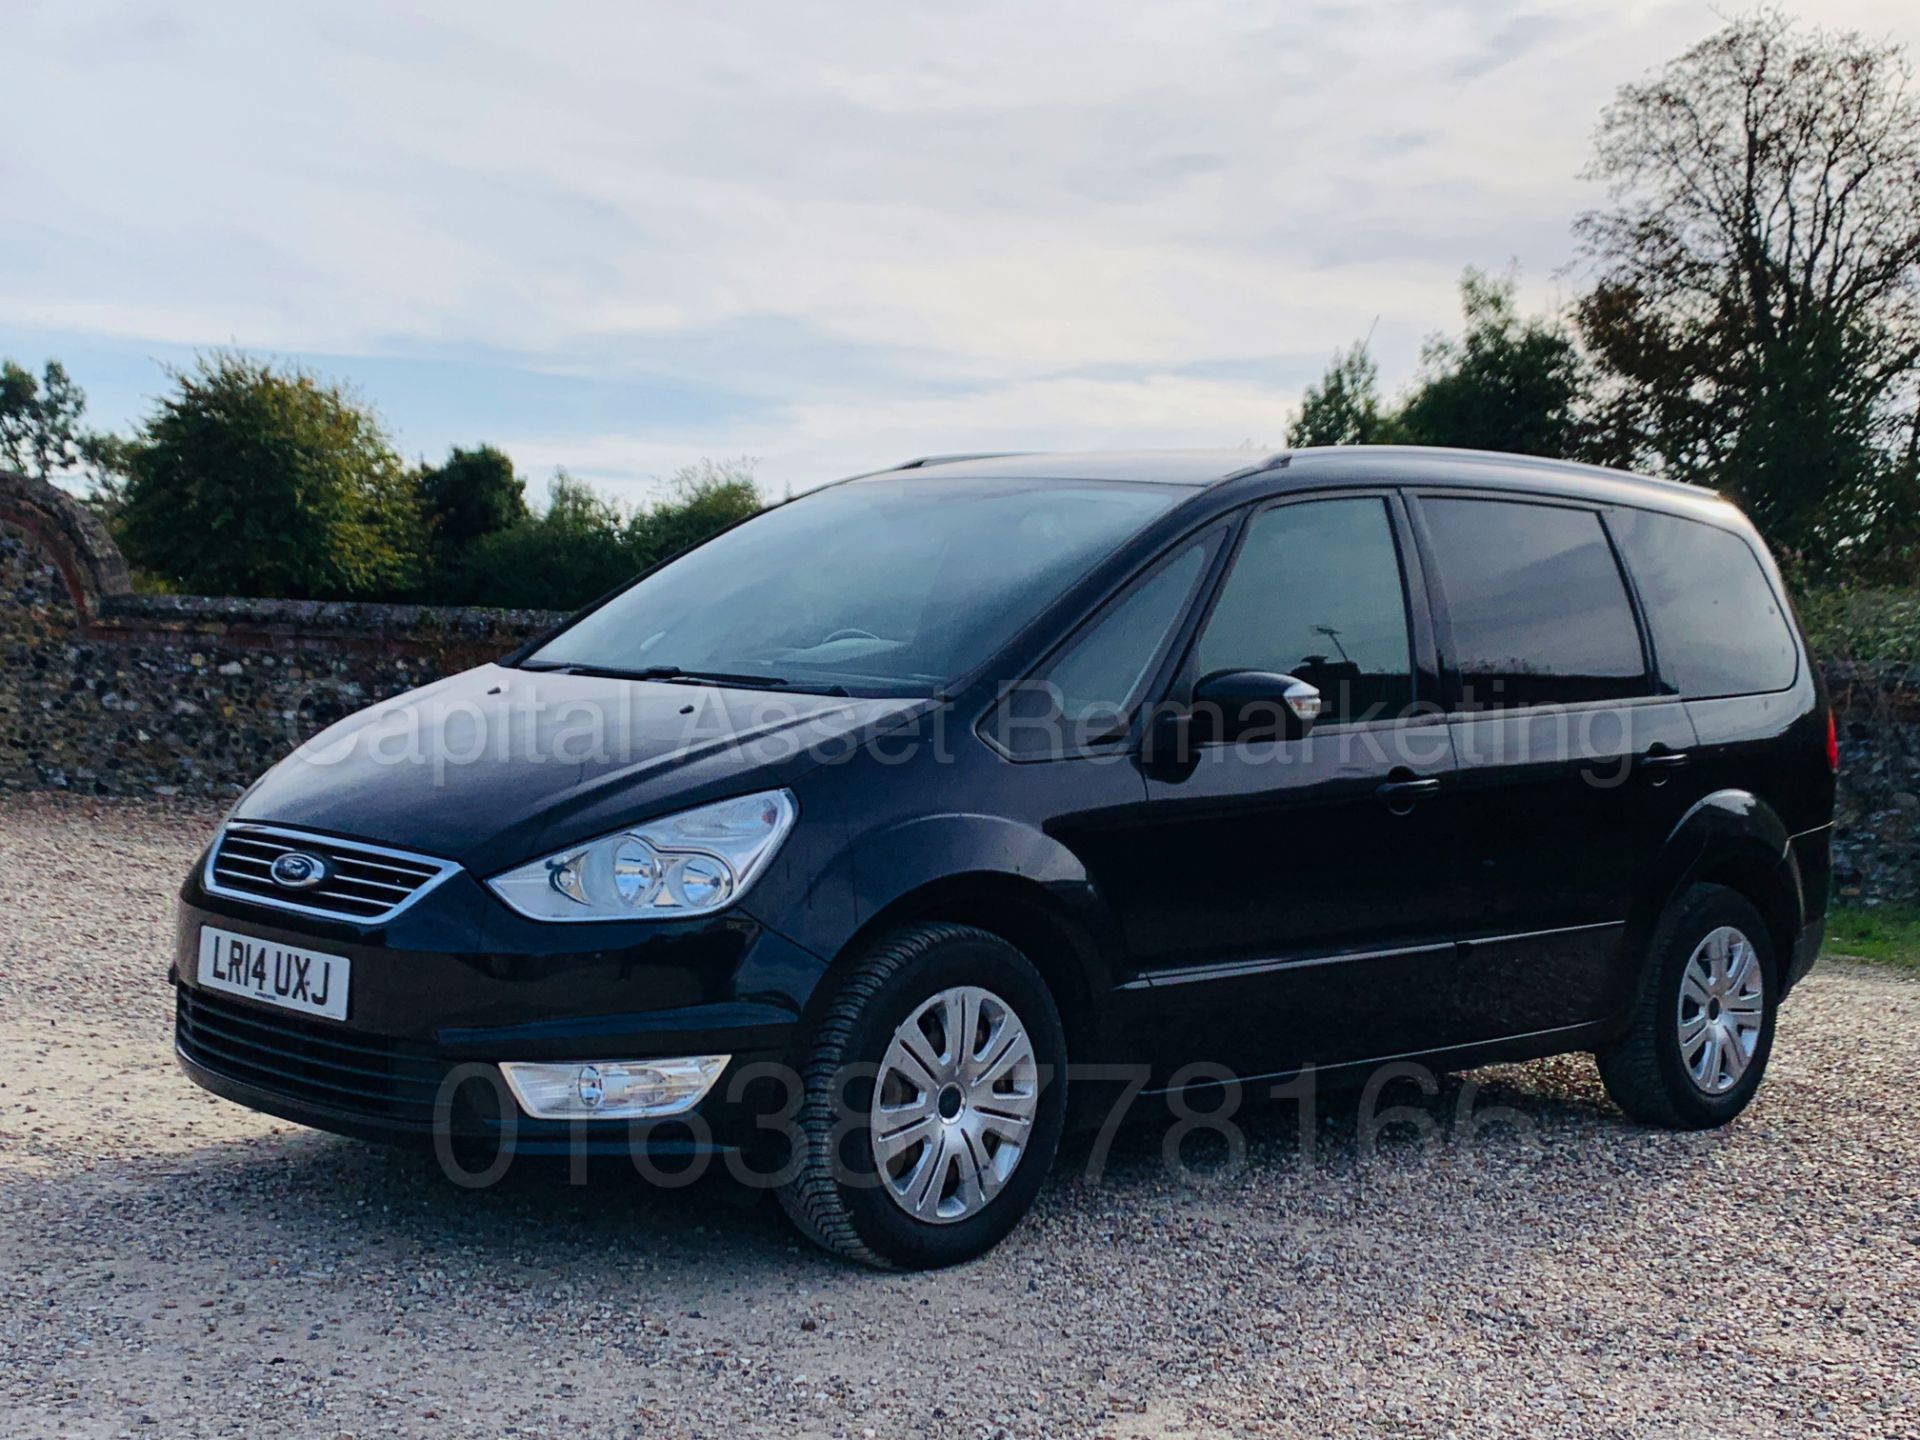 (ON SALE) FORD GALAXY **ZETEC** 7 SEATER MPV (2014) 2.0 TDCI - 140 BHP - AUTO POWER SHIFT (1 OWNER) - Image 5 of 38